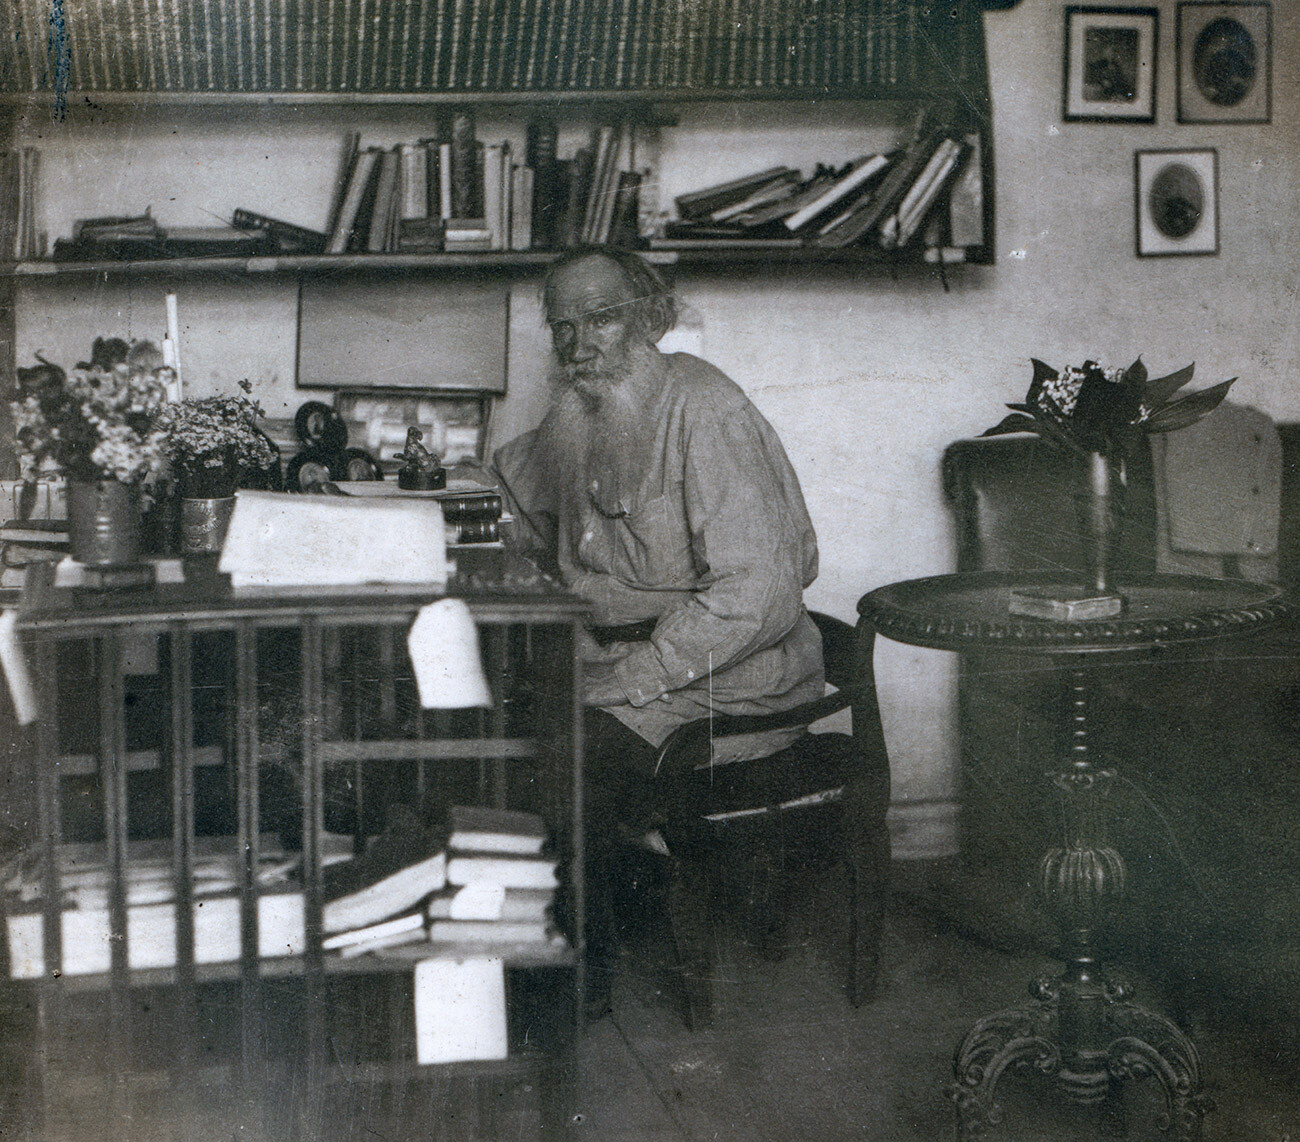 Yasnaya Polyana. Portrait of Leo Tolstoy in his study. Monochrome contact print from original glass negative (not preserved). May 23, 1908